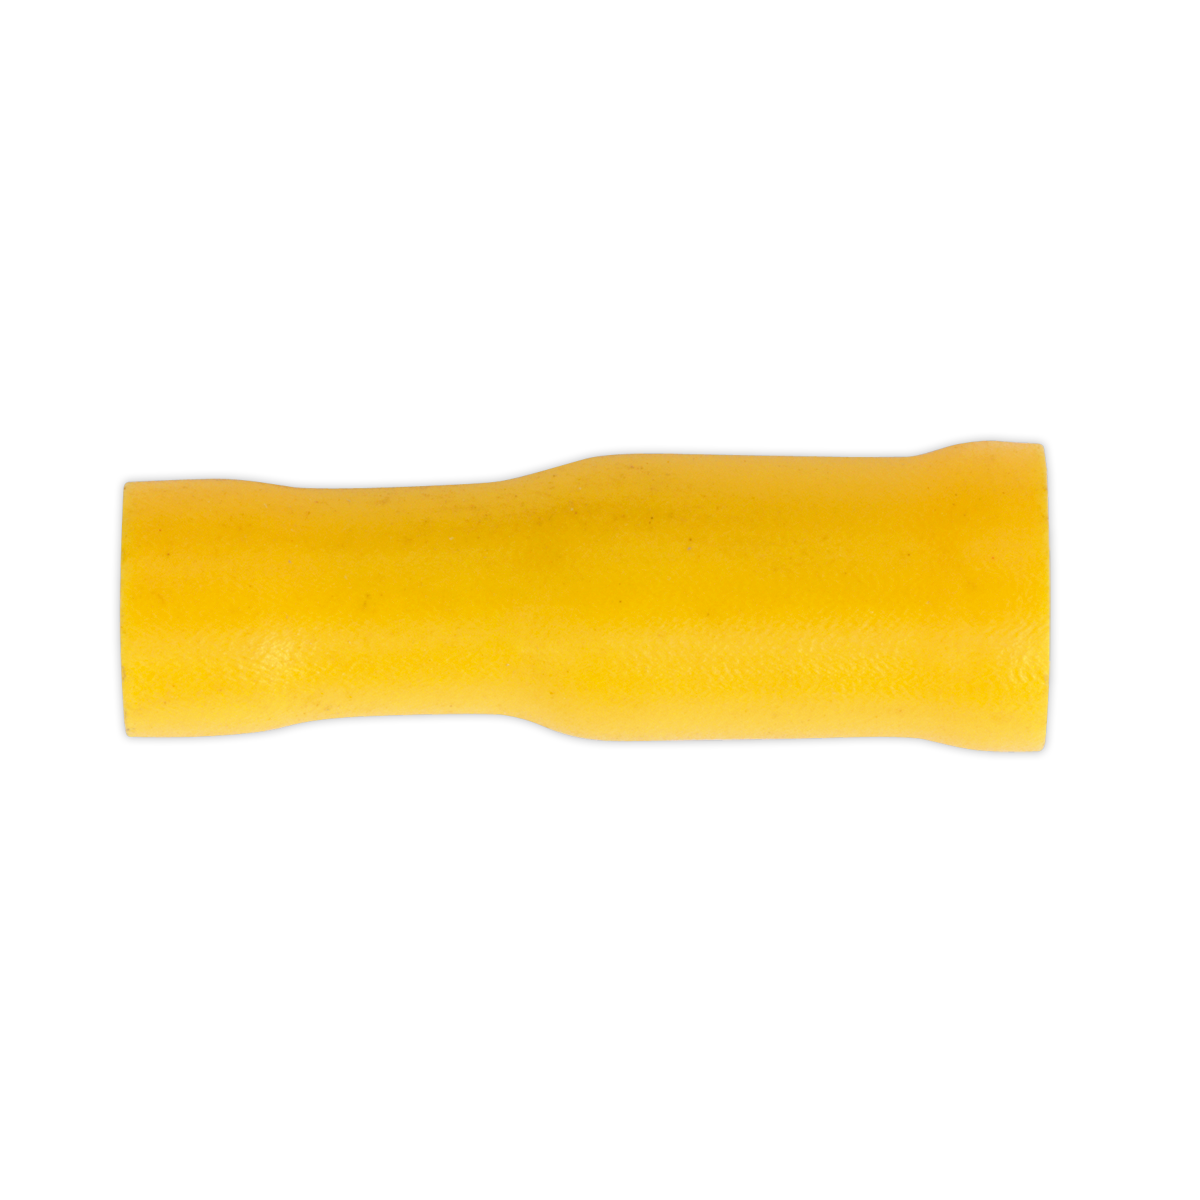 Sealey YT22 Female Socket Terminal Ø5mm Yellow Pack of 100